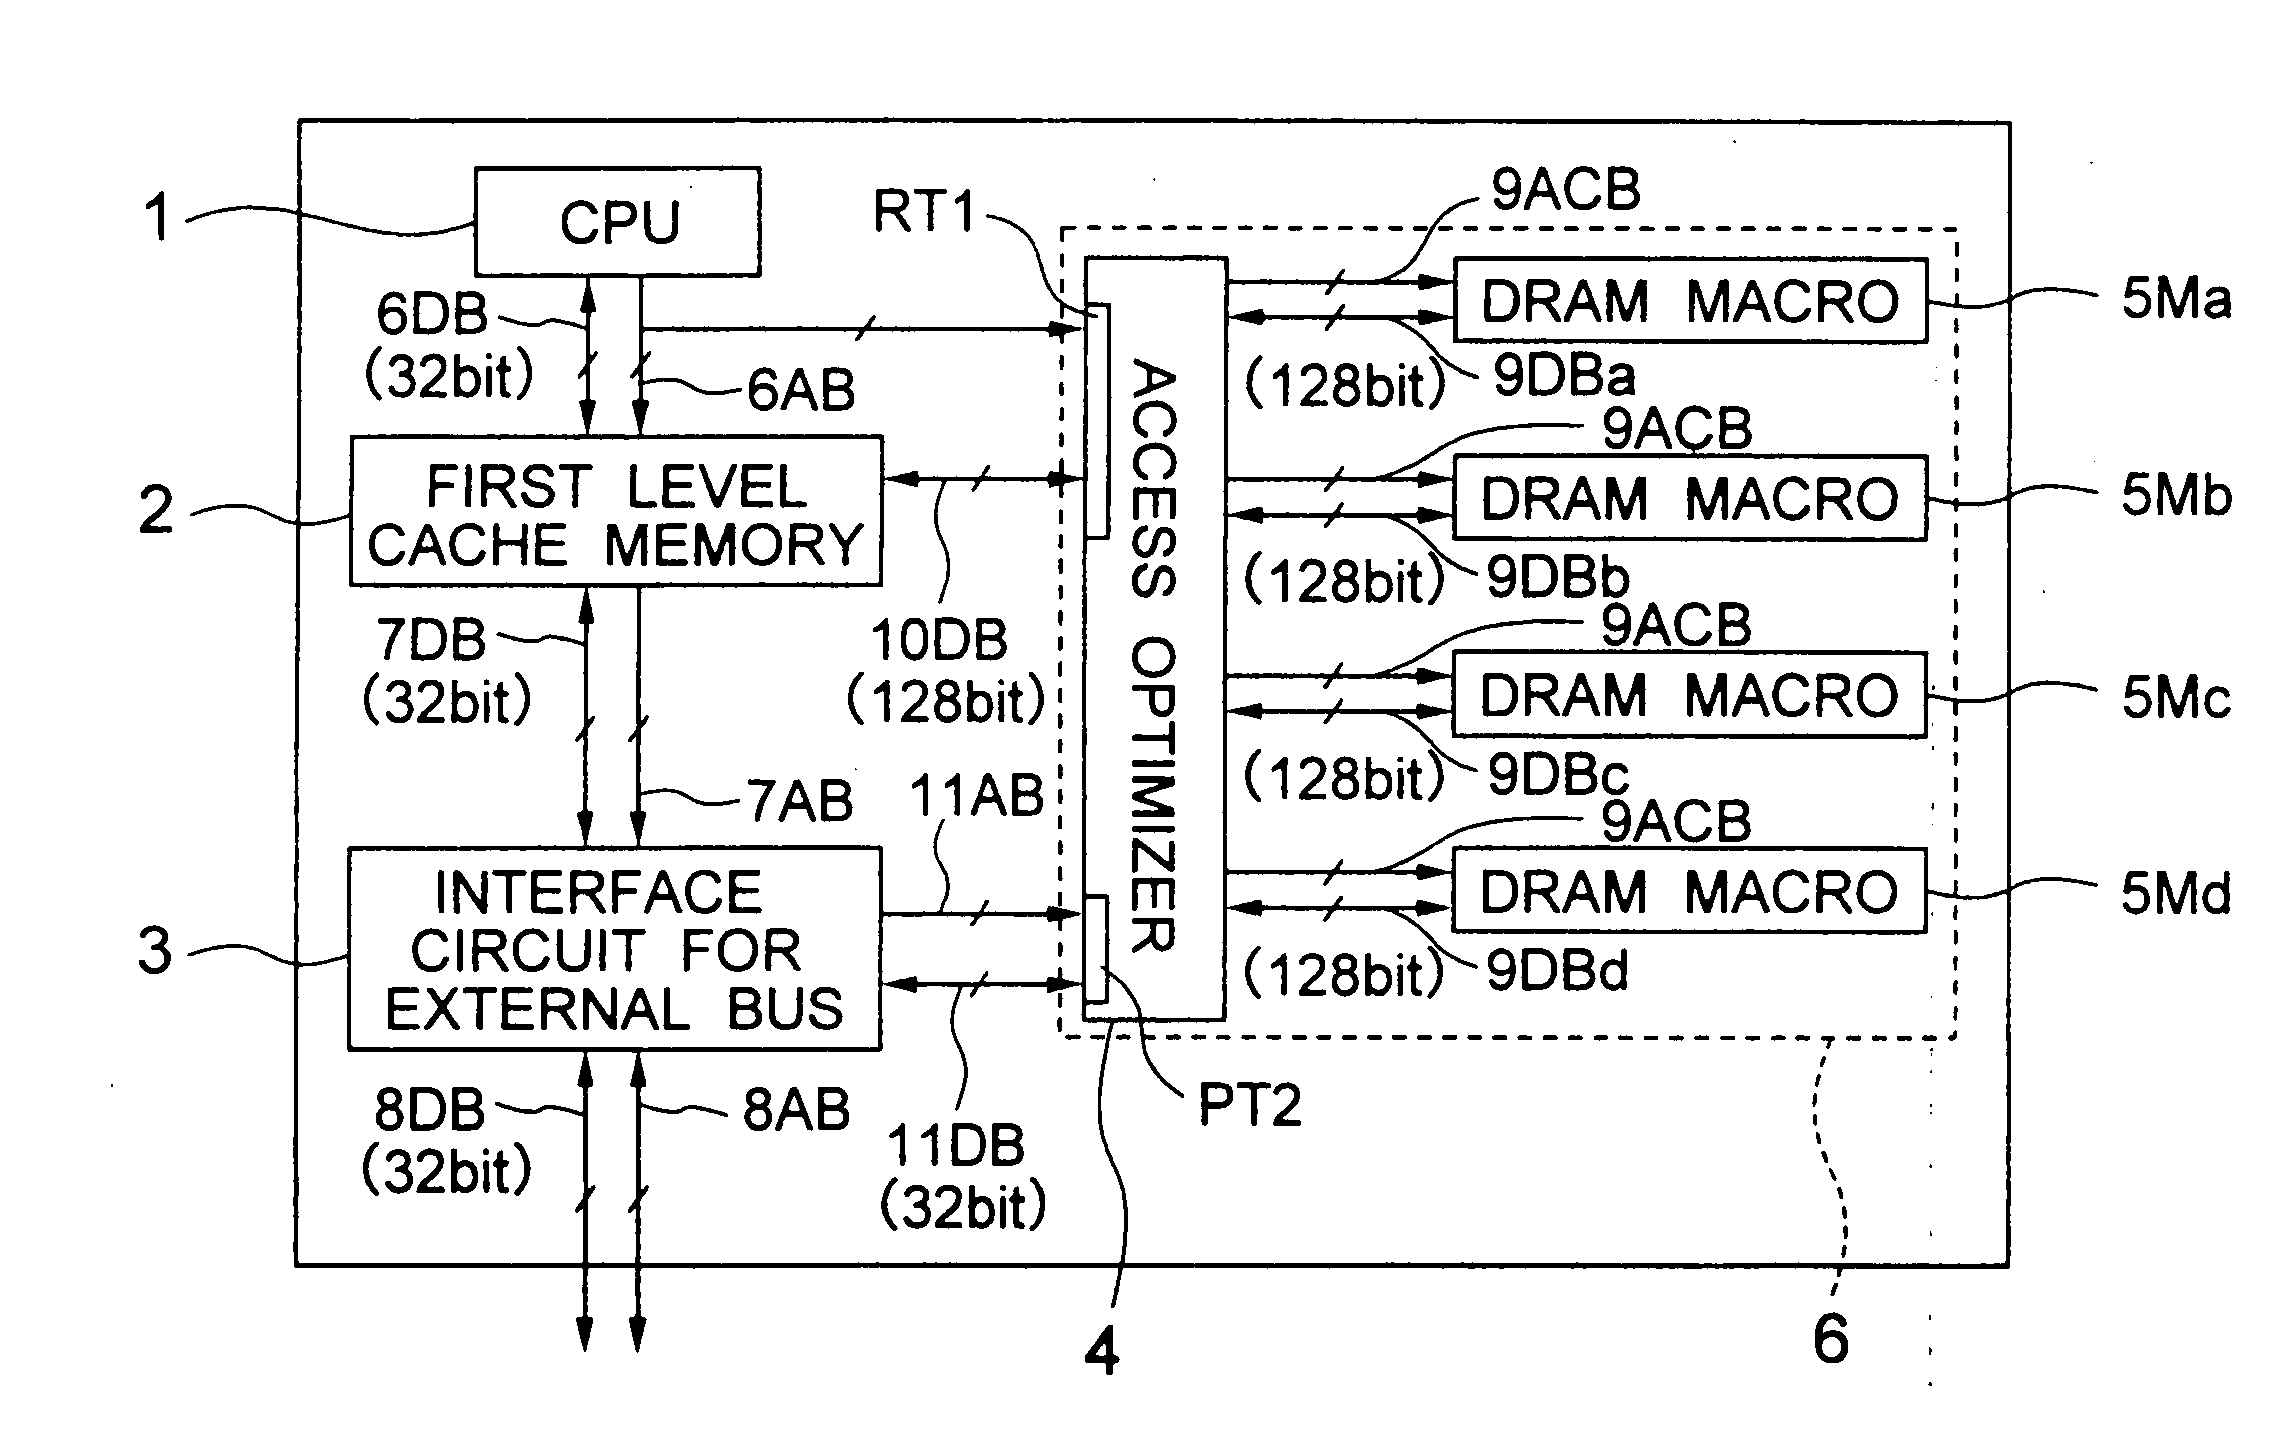 Semiconductor integrated circuit and data processing system